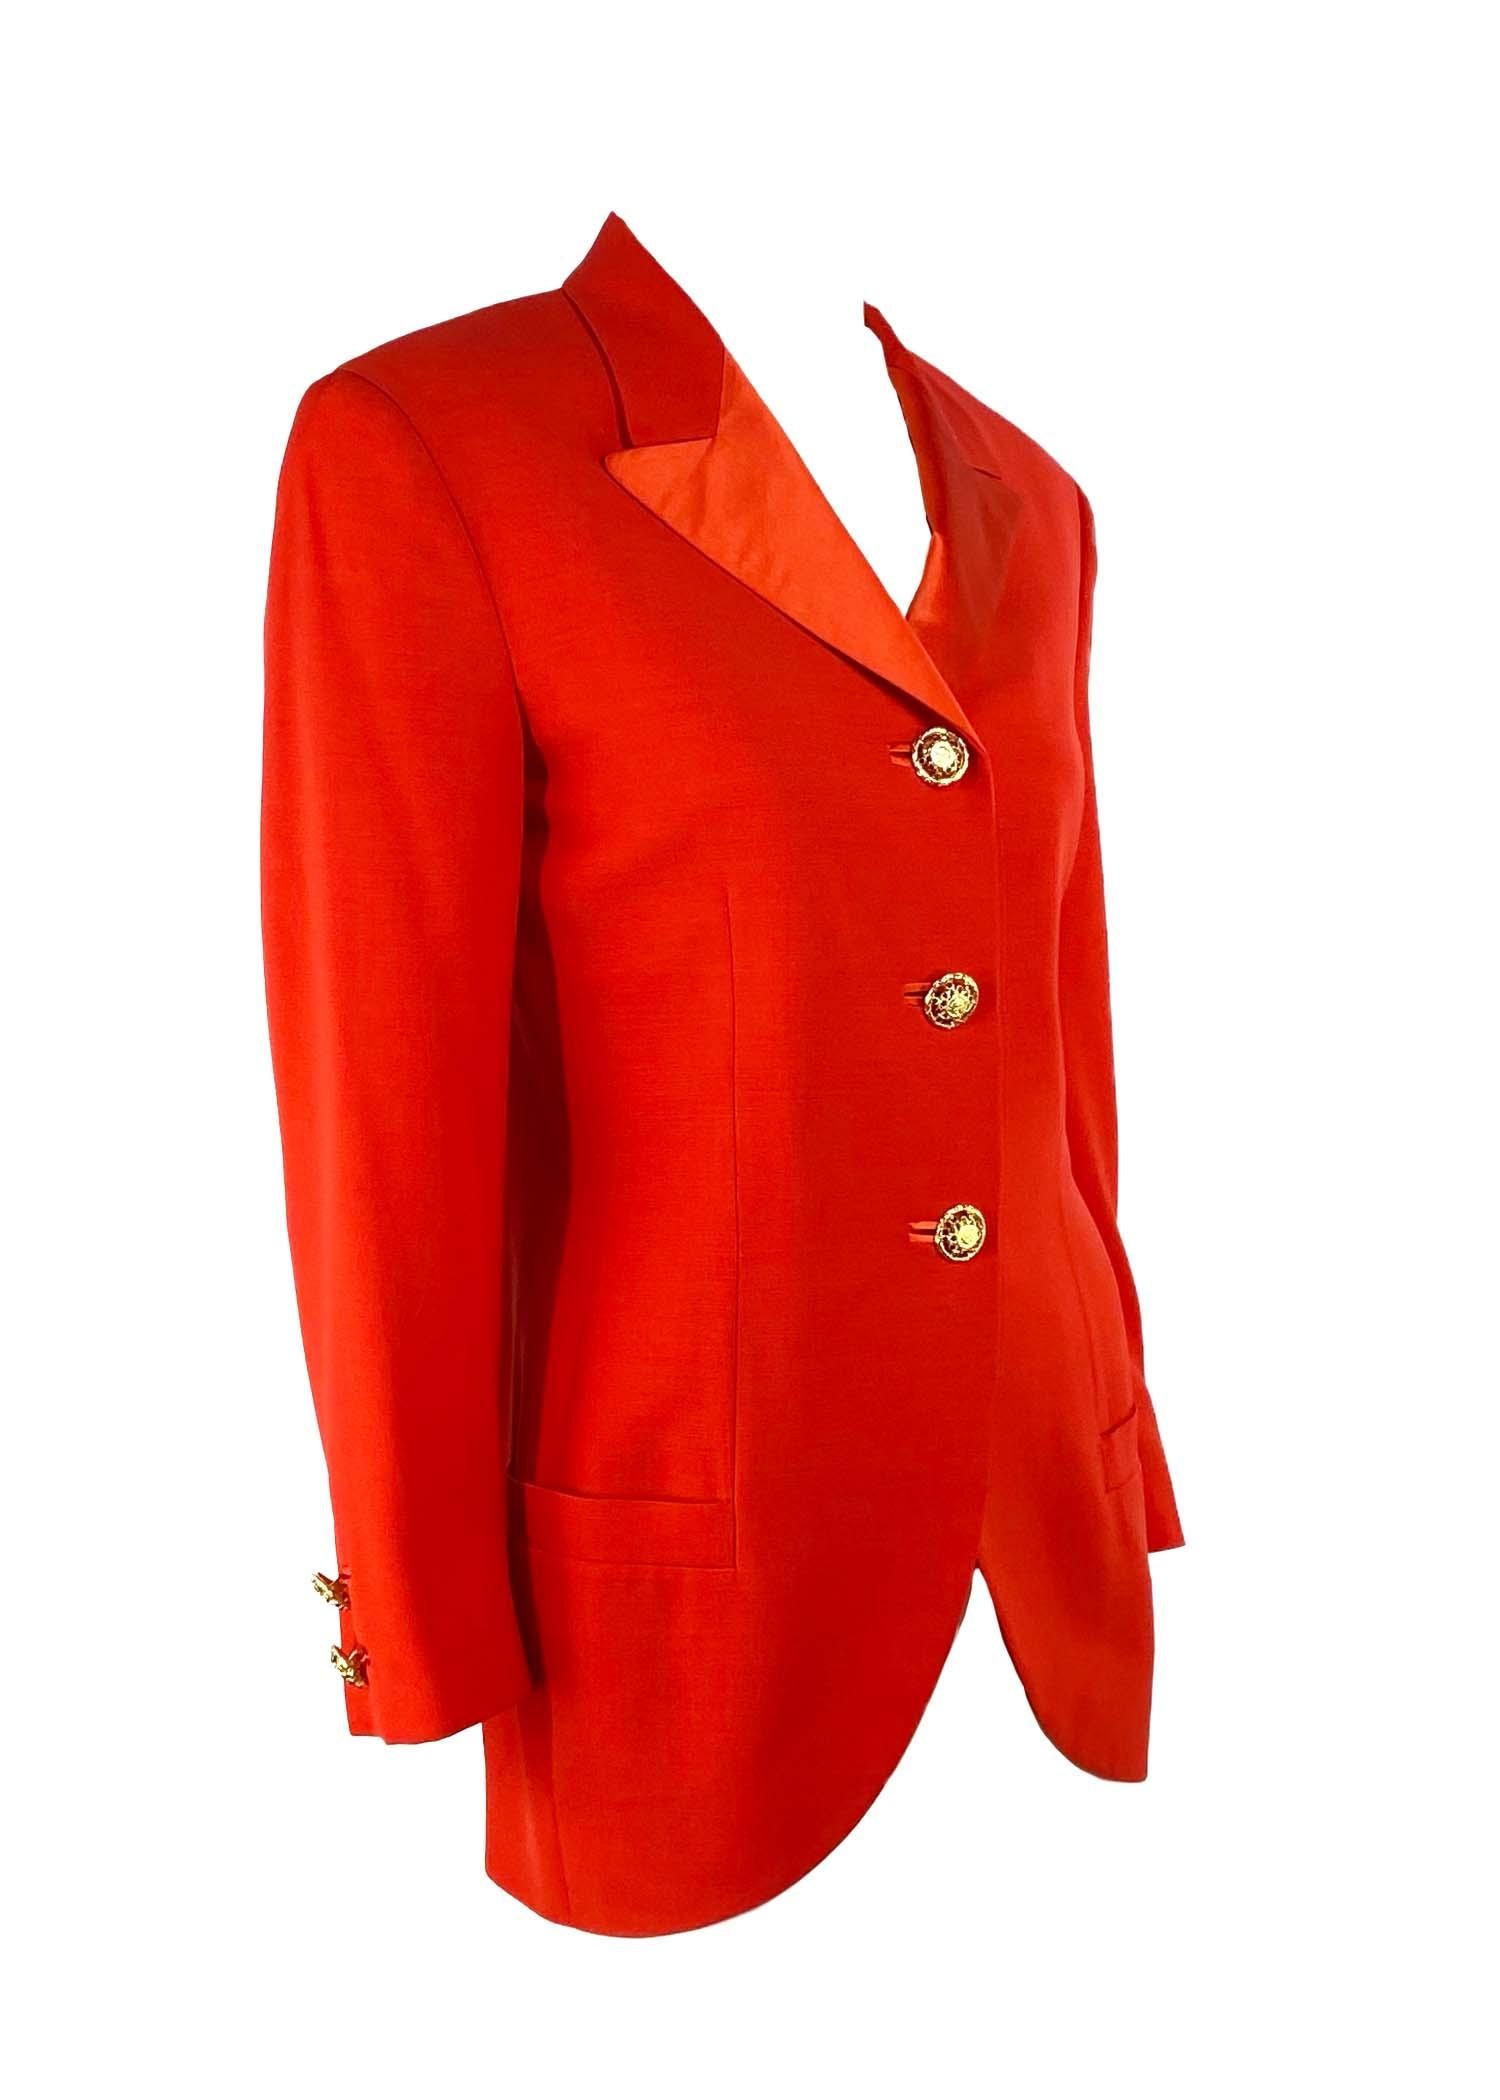 F/W 1992 Gianni Versace Couture Bondage (Miss S&M) Runway Collection Red Blazer  For Sale 3